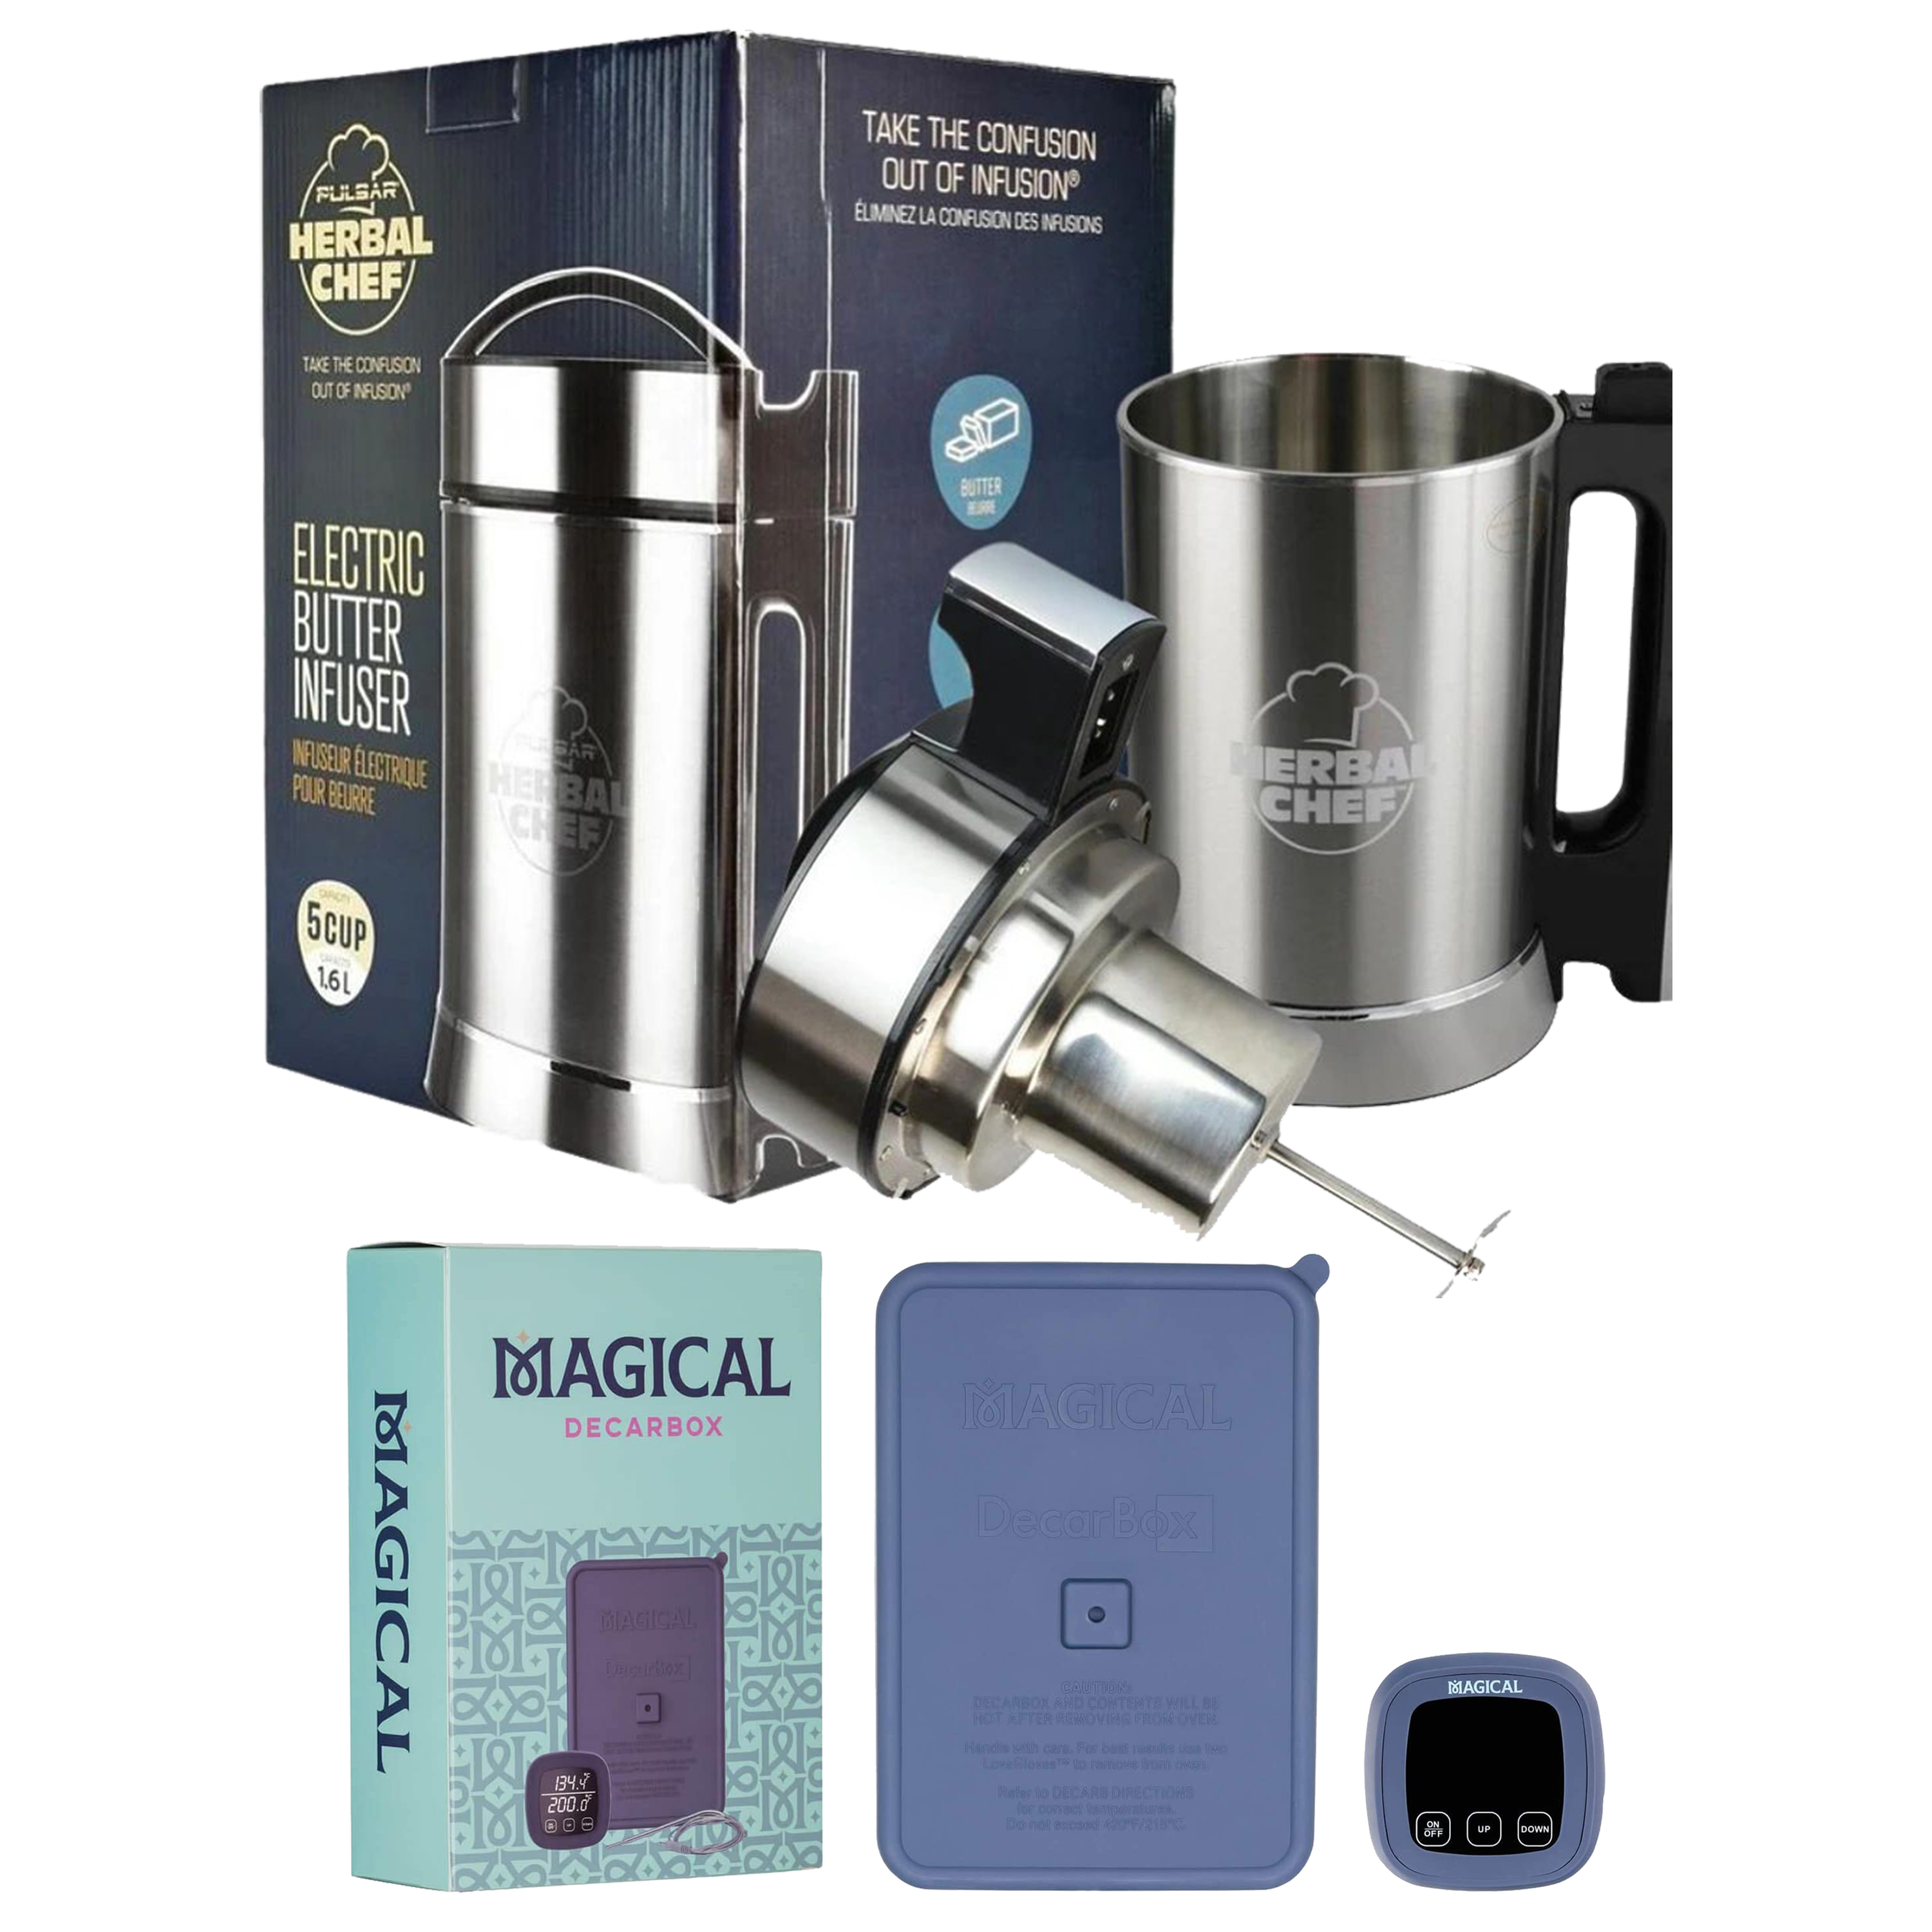 Herbal Chef Electric Butter Infuser + DecarBox Bundle